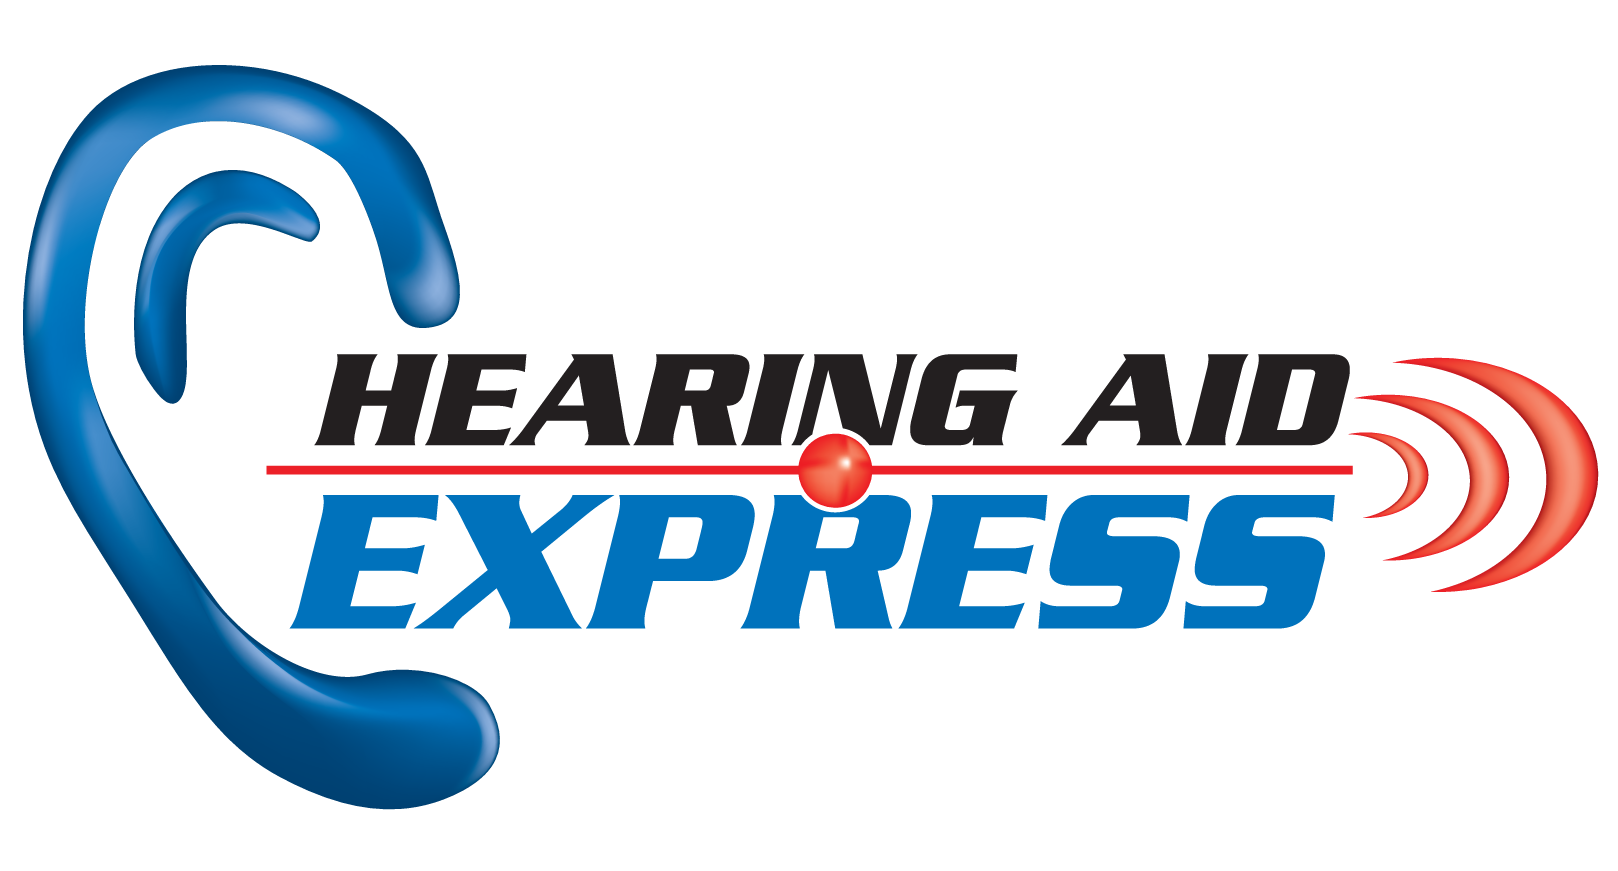 Hearing Aid Express- online store